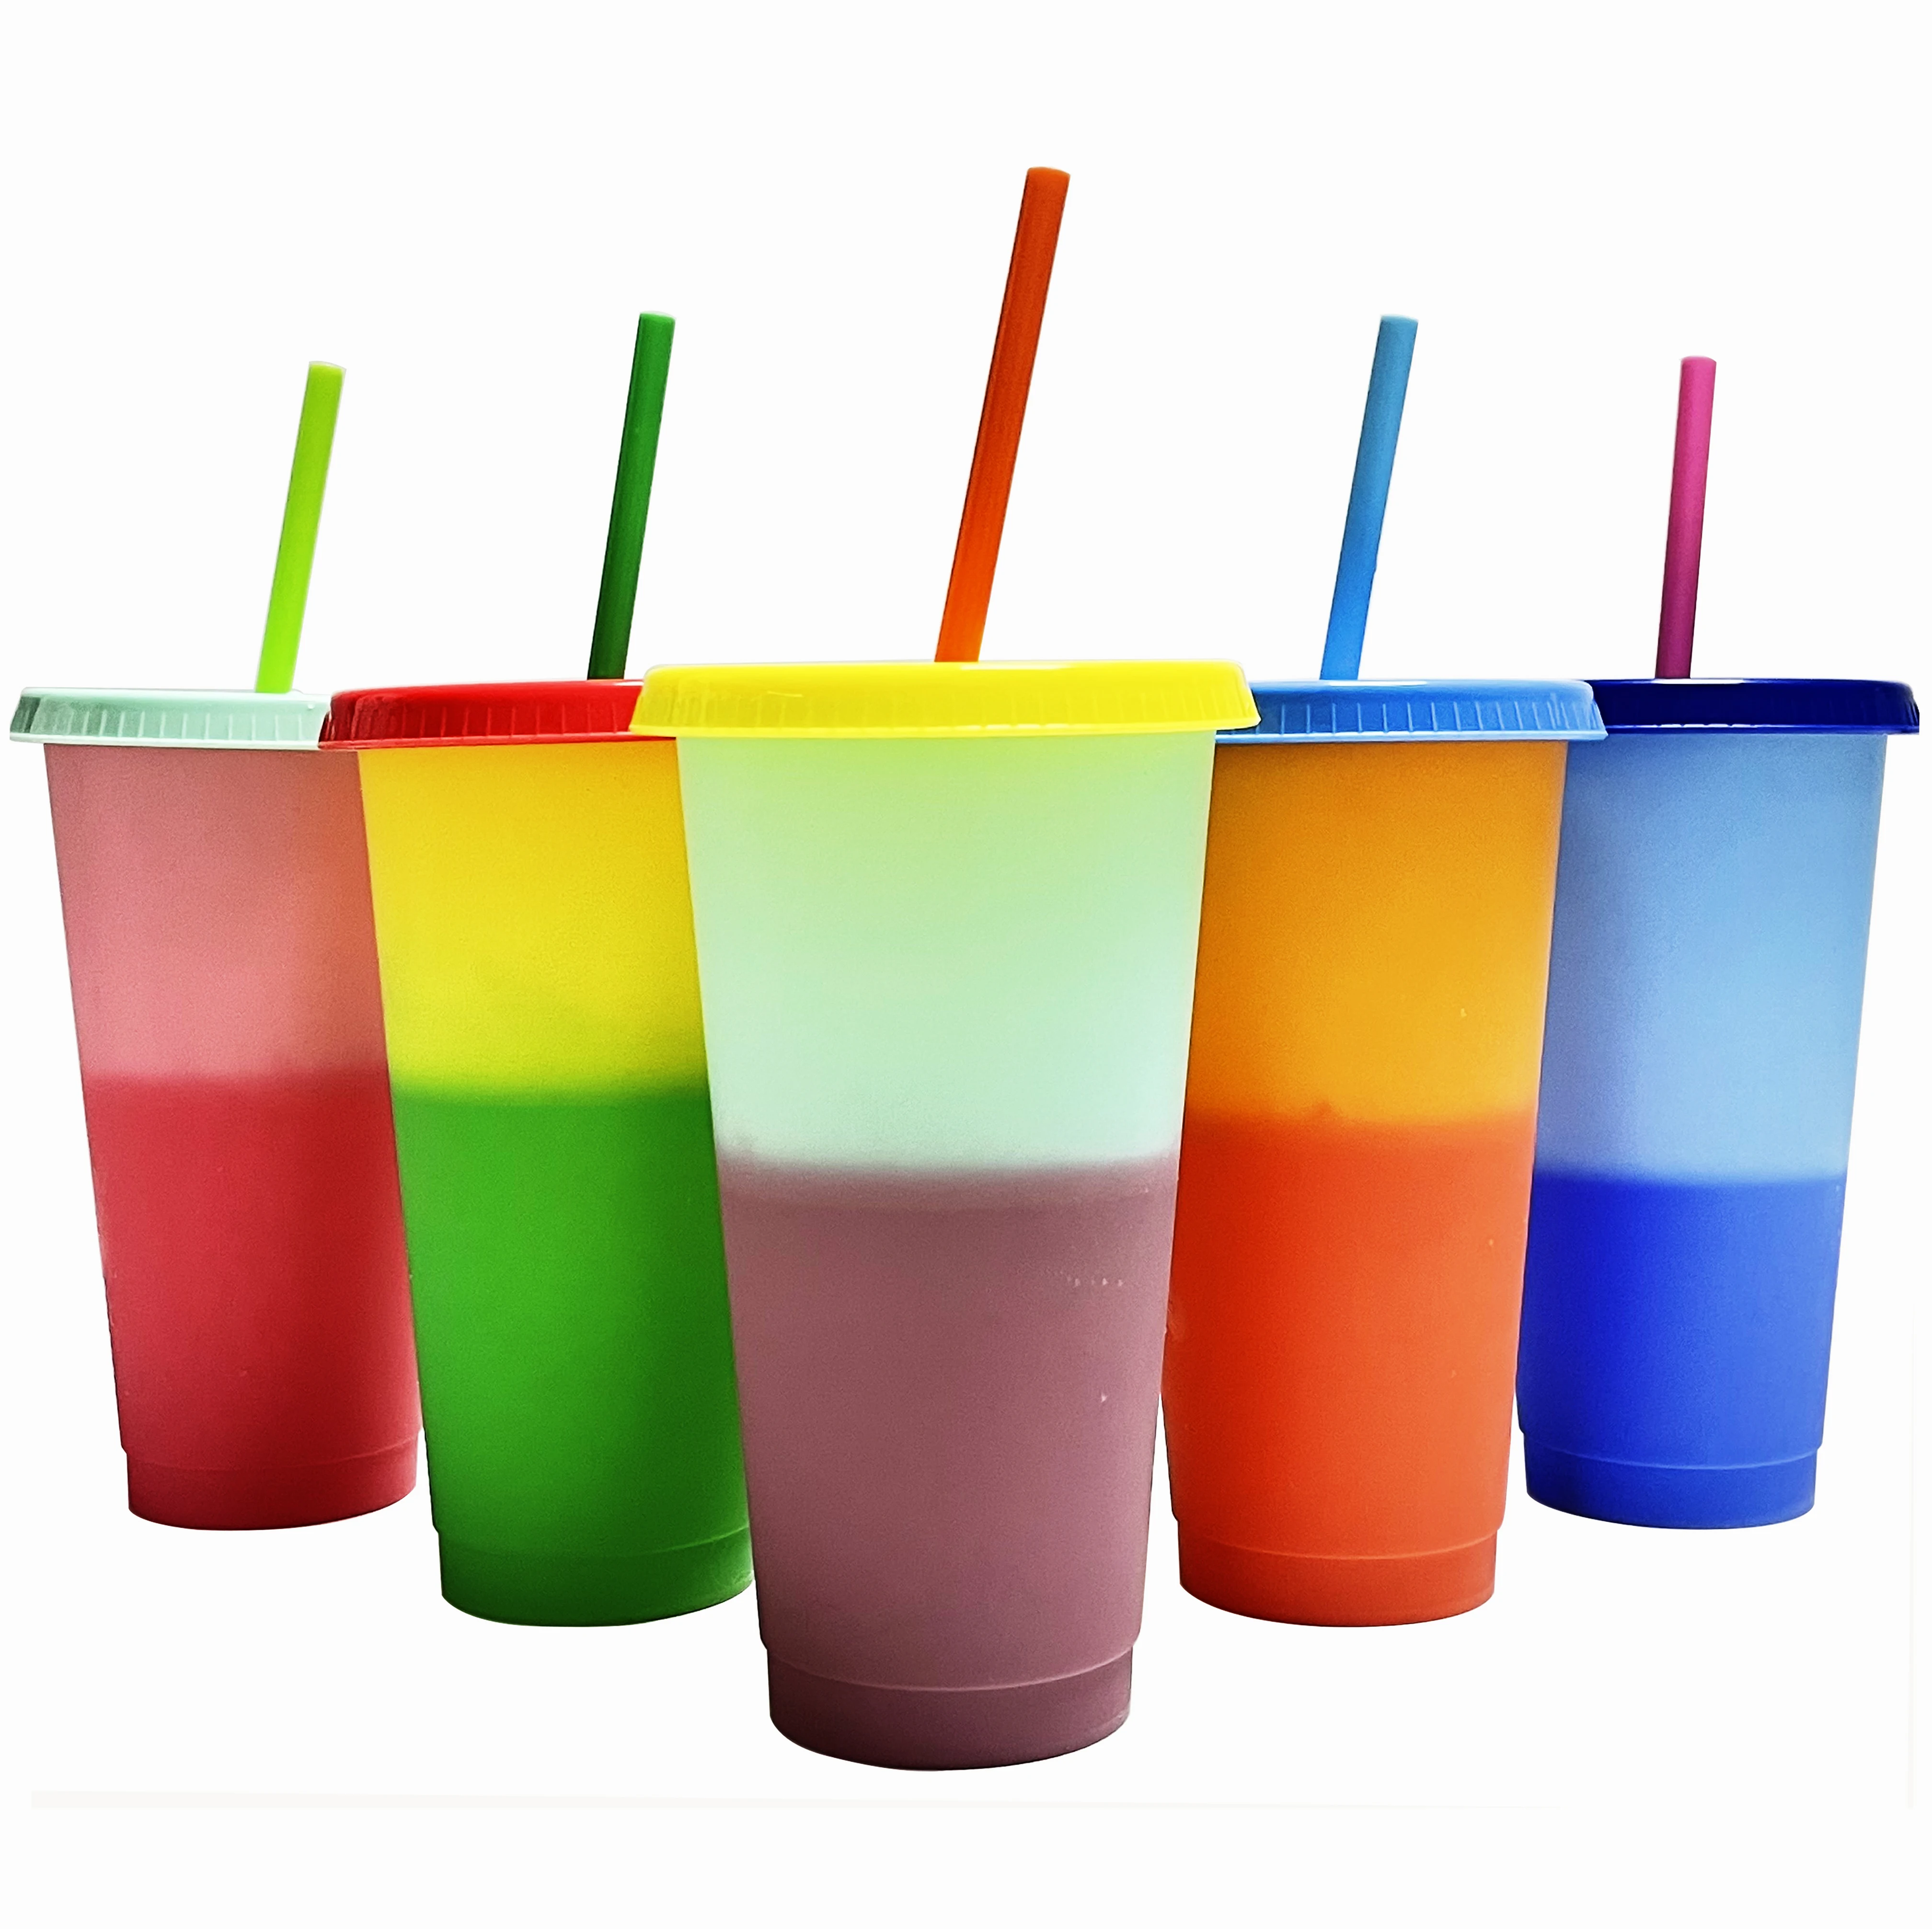 

24oz 700ml whosale resuable tumblers plastic cold color changing cups with lids and straws sets, Pastel/ translucent